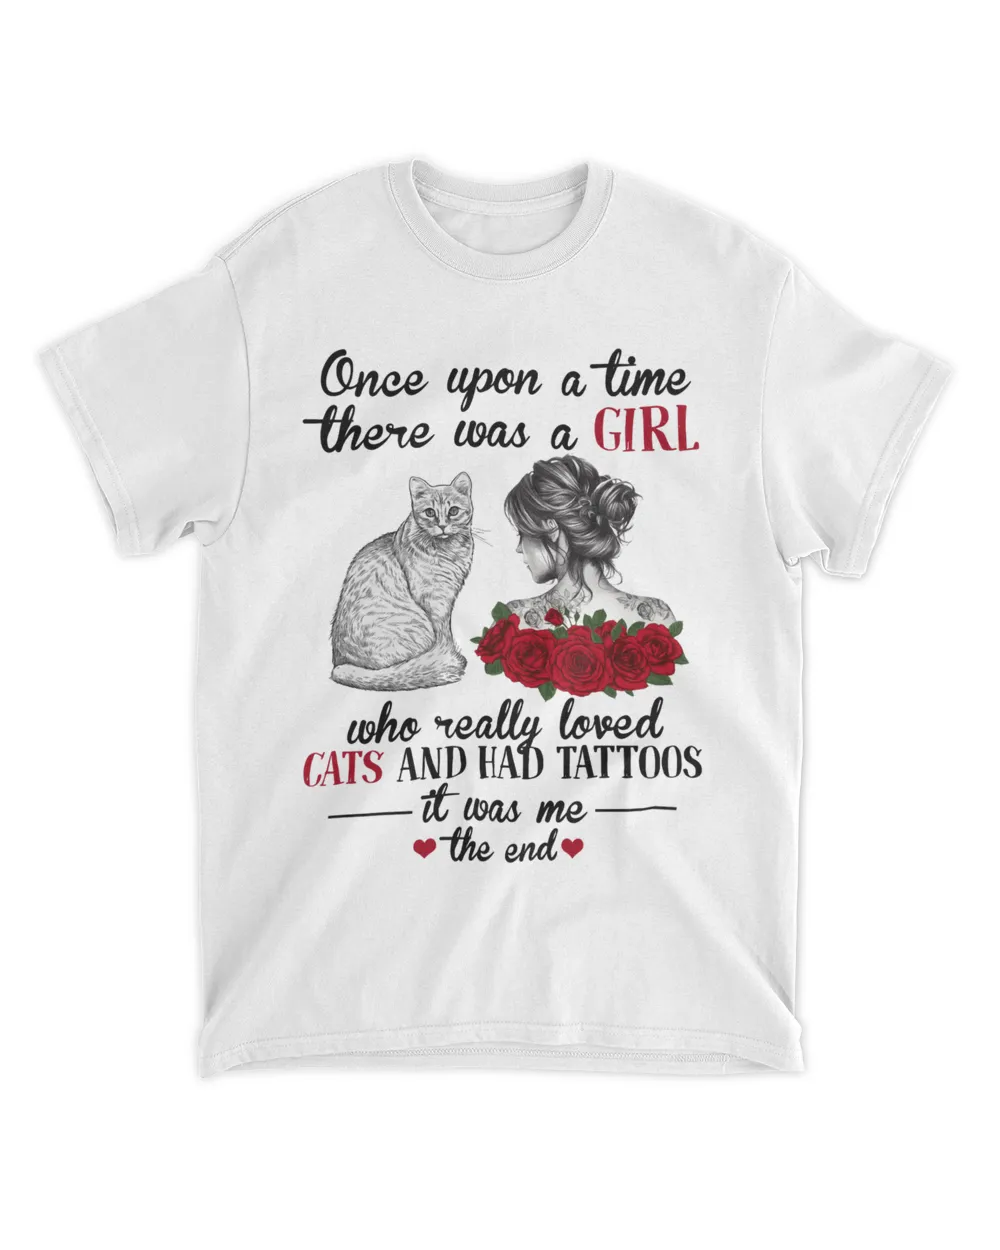 Once upon a time there was a girl cat